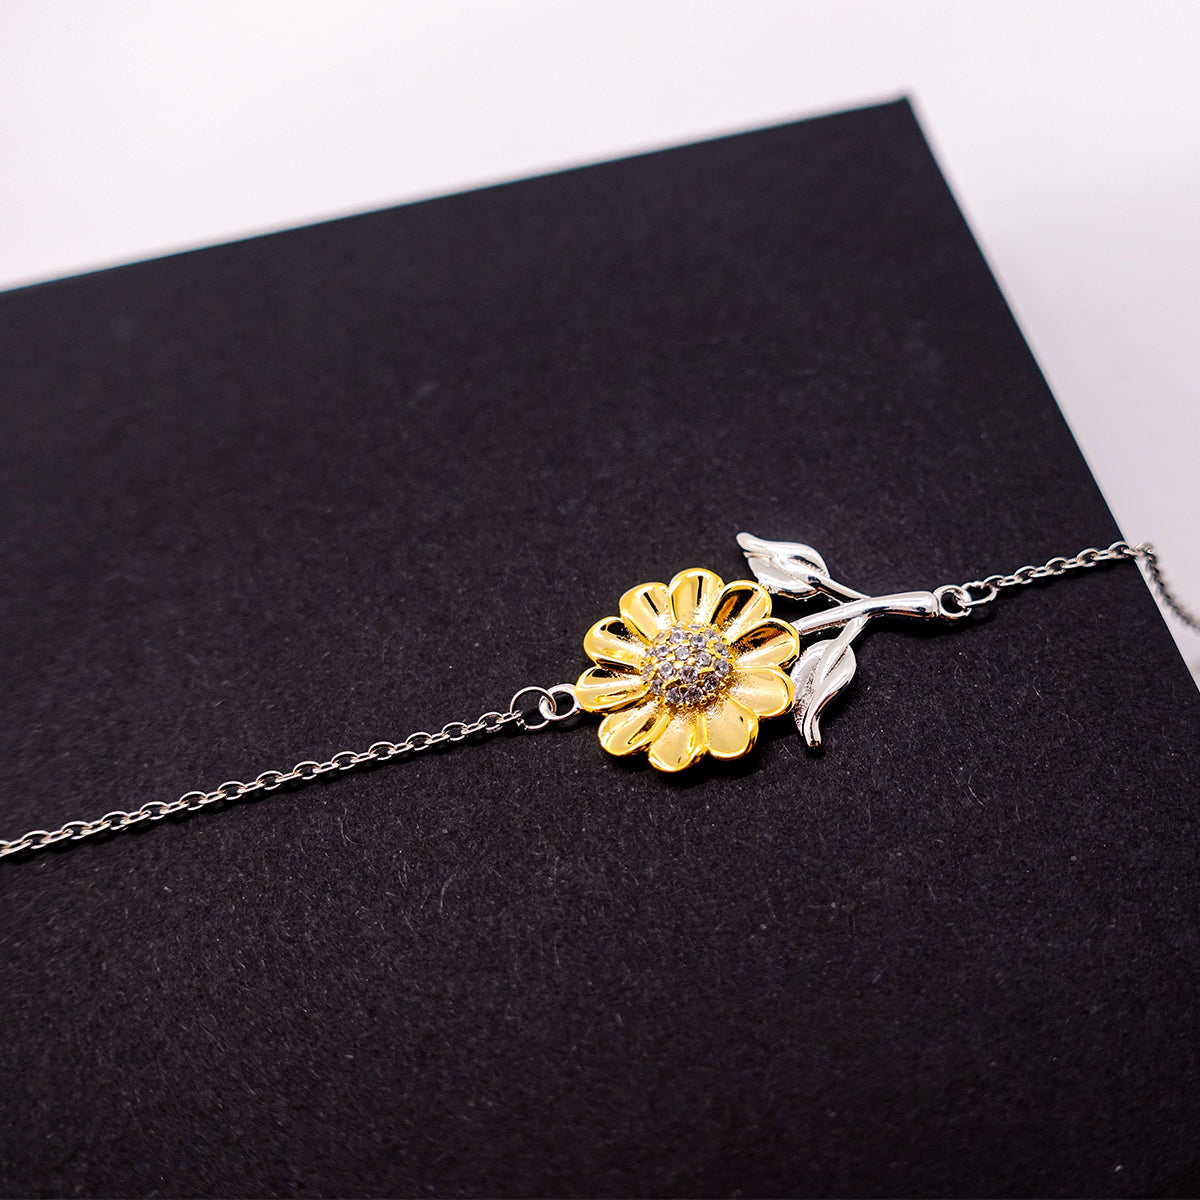 To My Bonus Sister Gifts from Sister, Unique Sunflower Bracelet Inspirational Christmas Birthday Graduation Gifts for Bonus Sister I'm always with you. Be brave, have courage and love life. Love, Sister